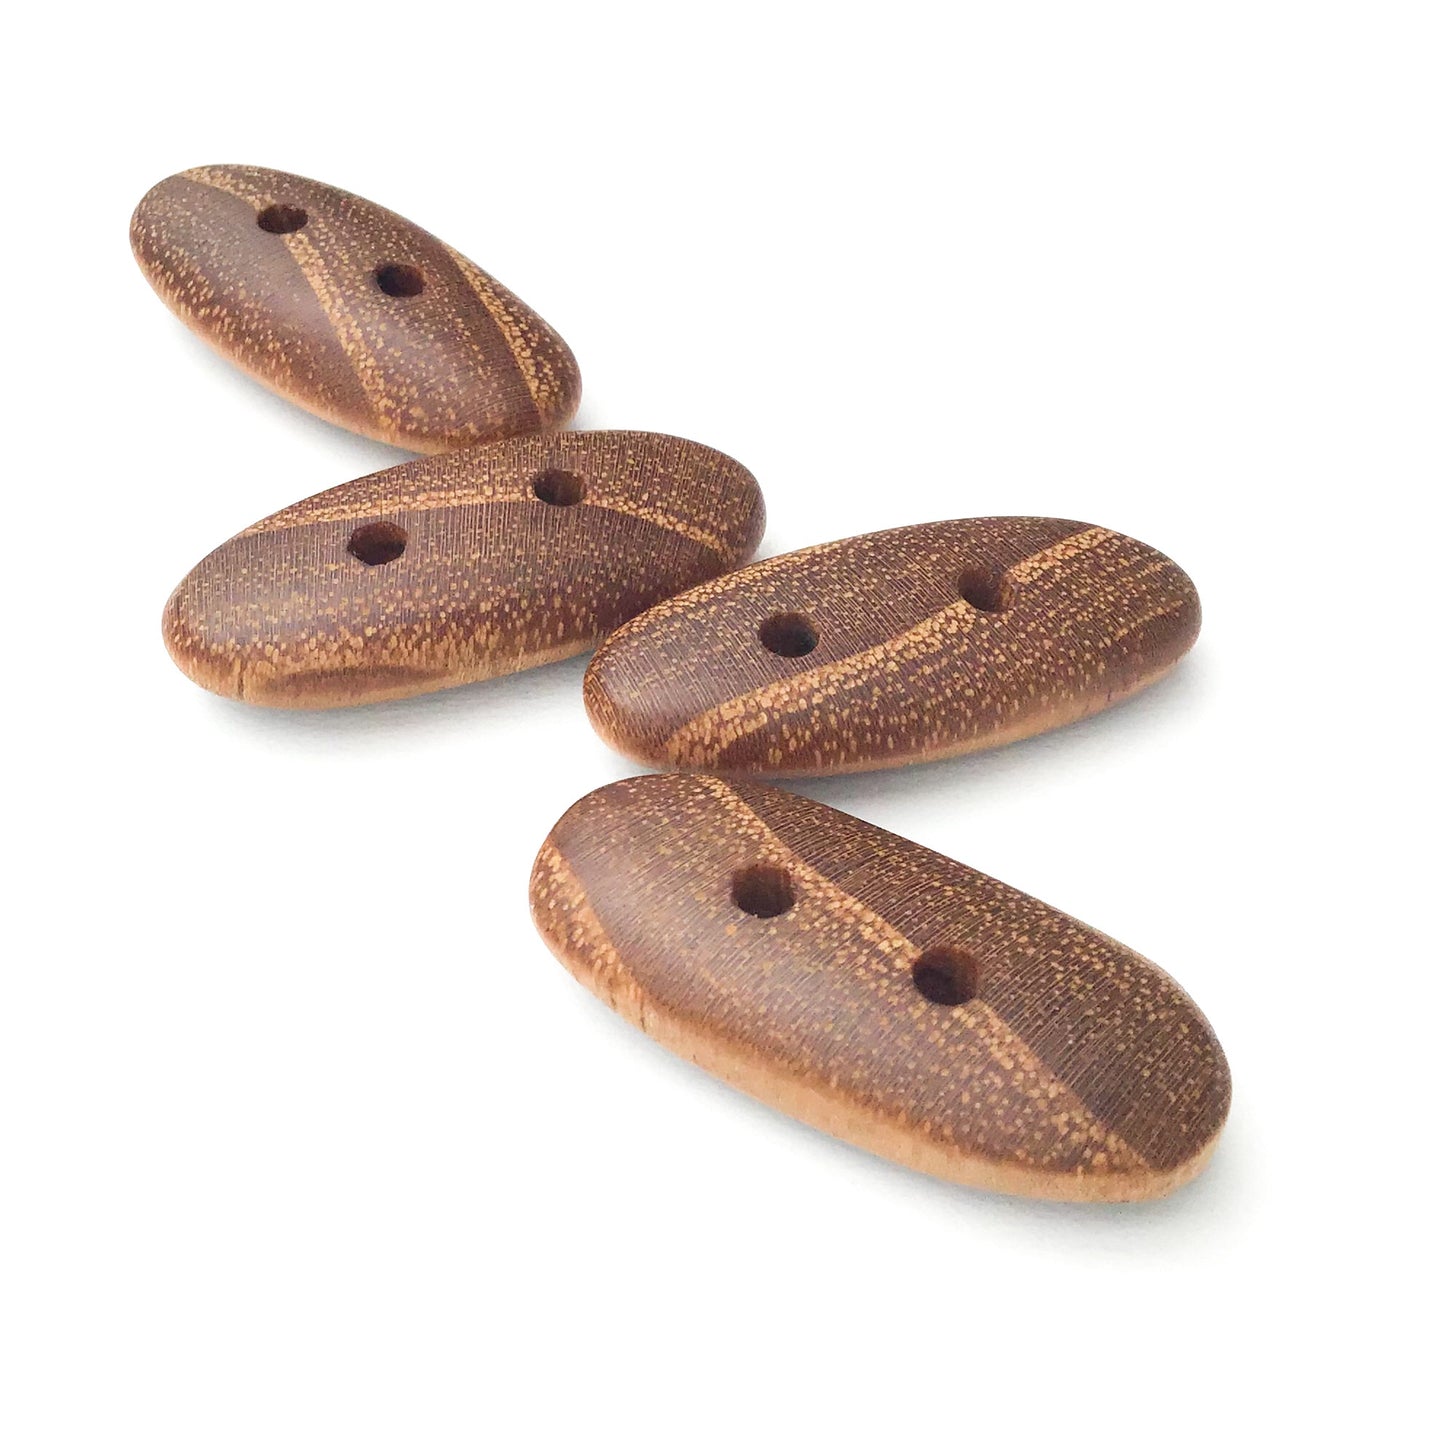 Black Locust Wood Buttons - Wooden Toggle Buttons - 5/8" X 1 3/8" - 4 Pack